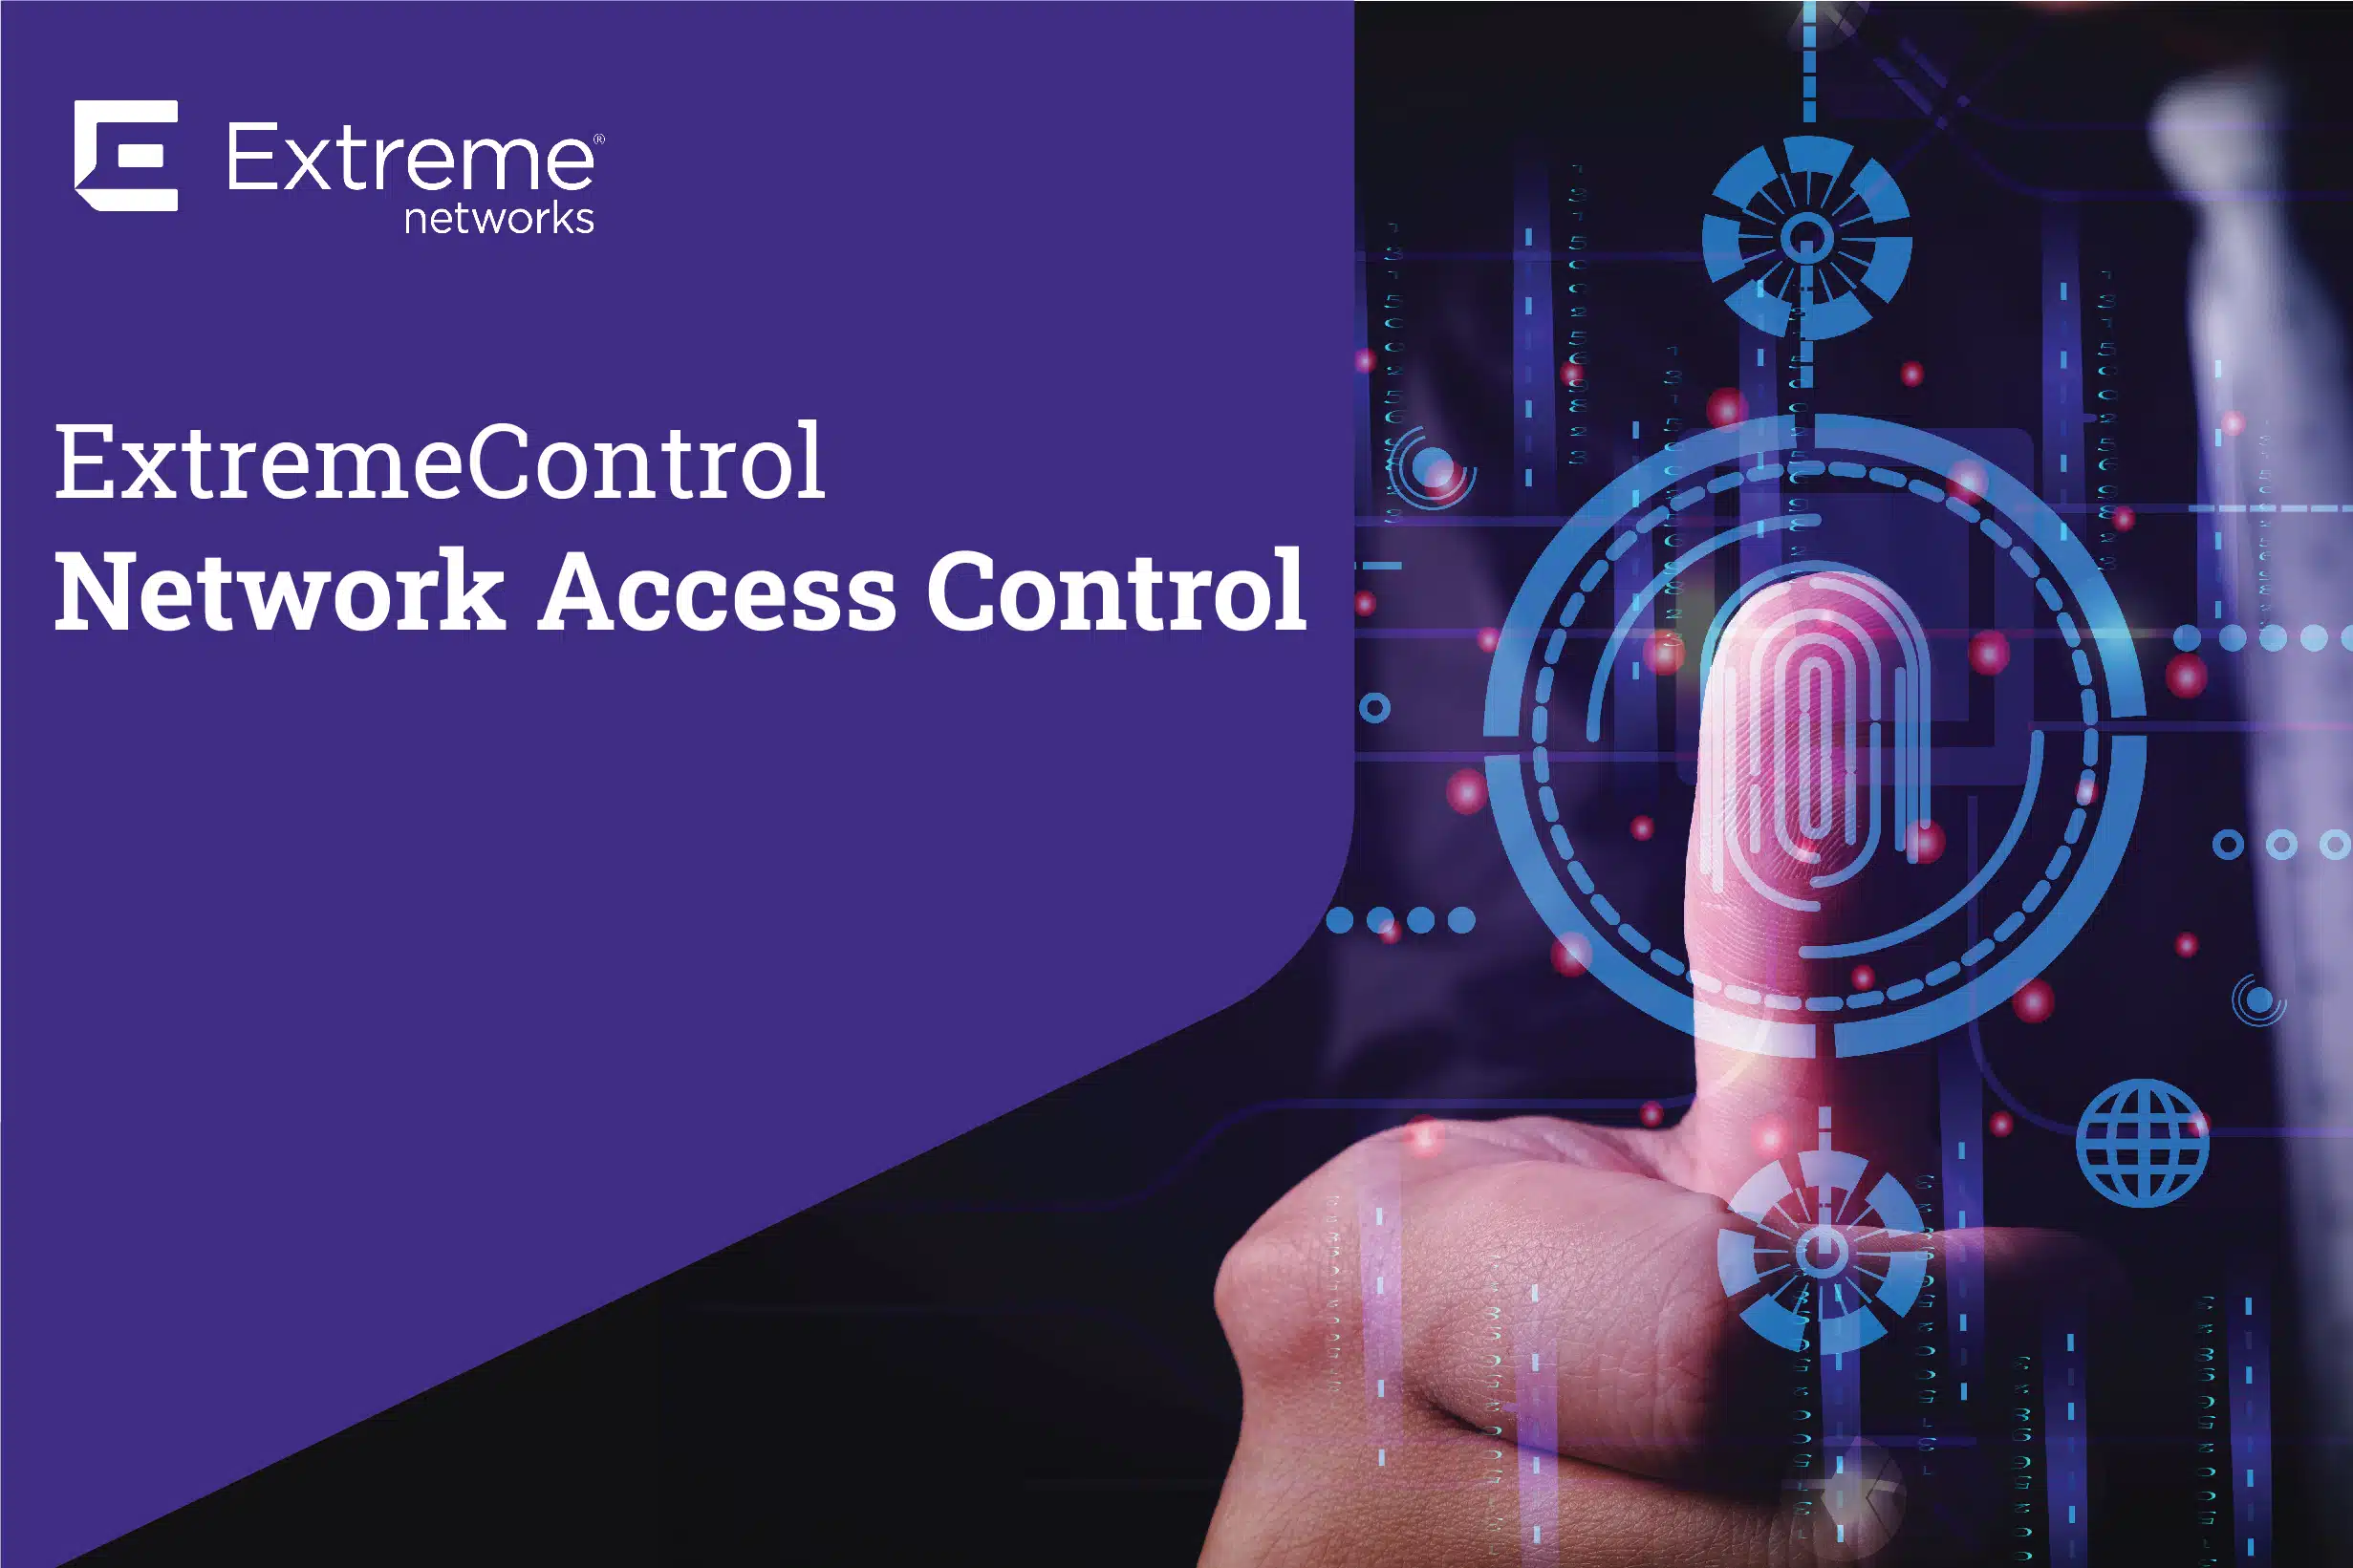 ExtremeControl Network Access Control keeps your network edge